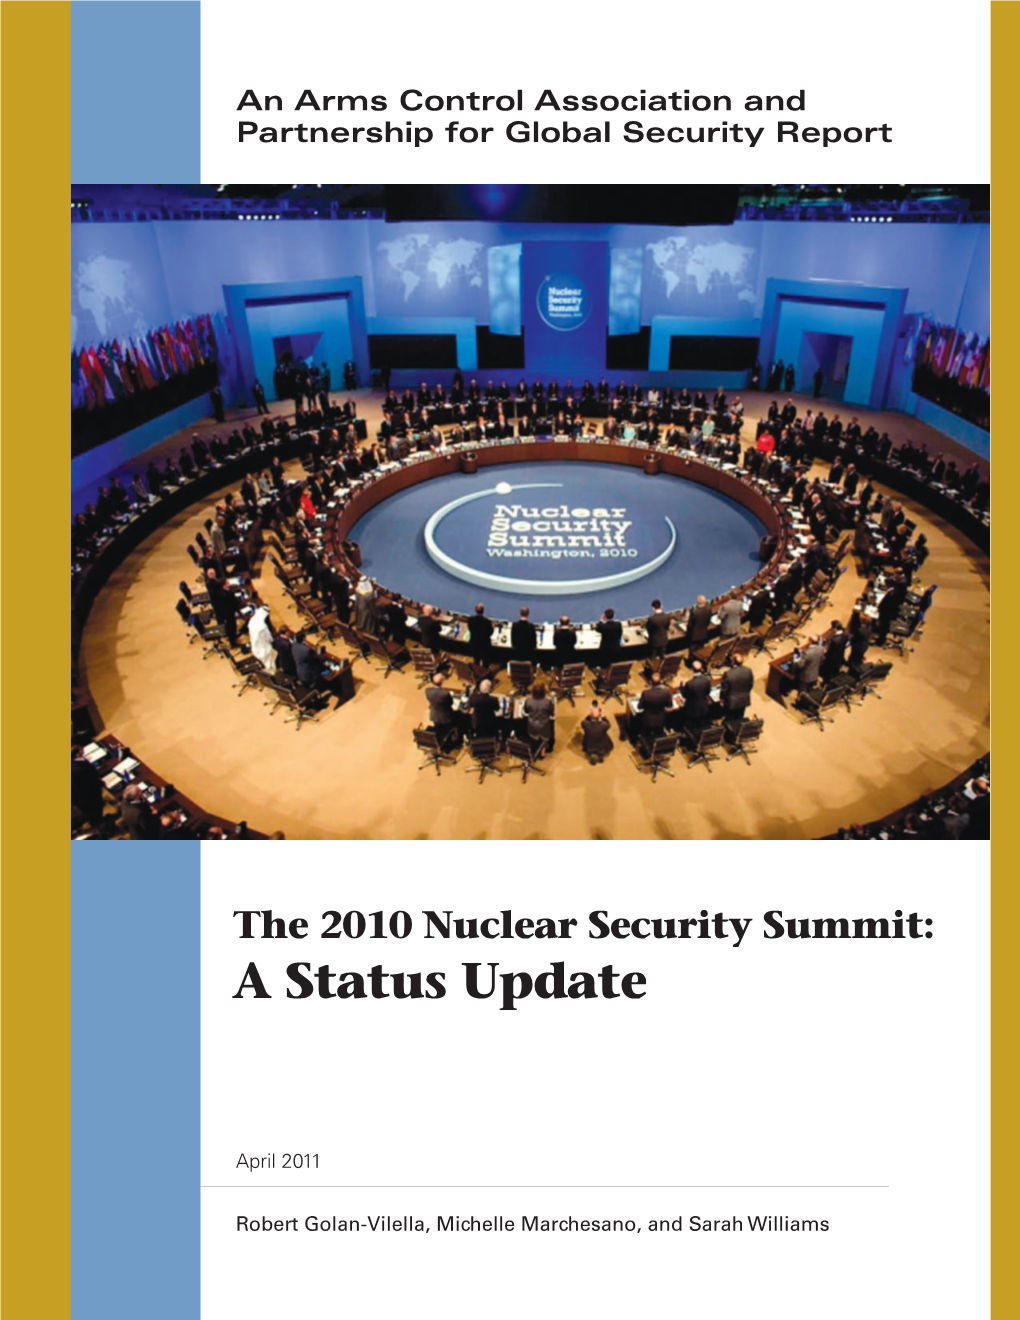 The 2010 Nuclear Security Summit: a Status Update